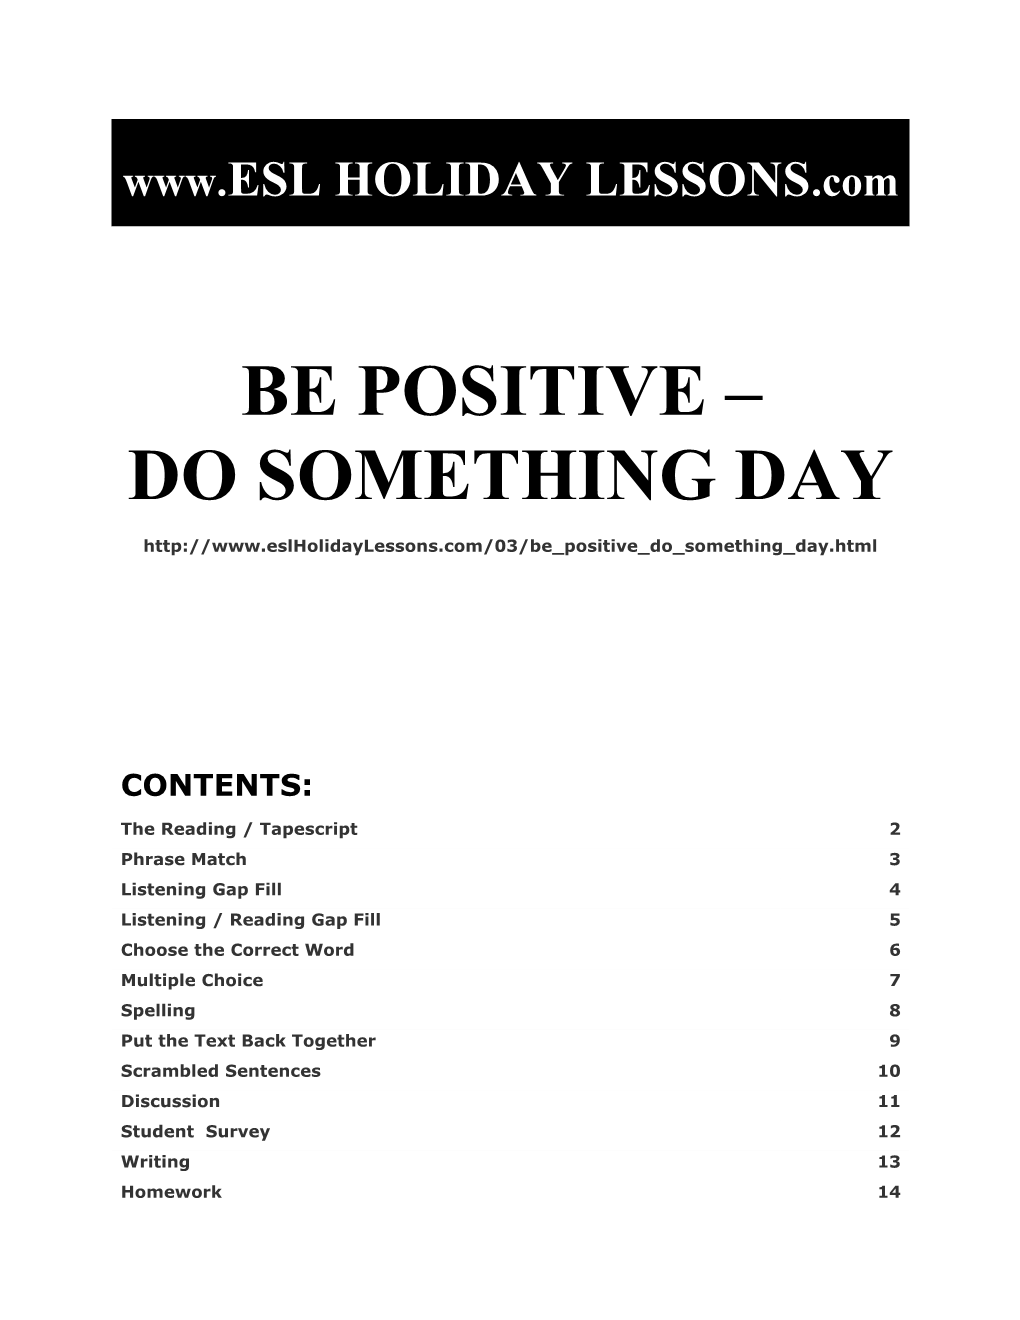 Holiday Lessons - Be Positive Do Something Day